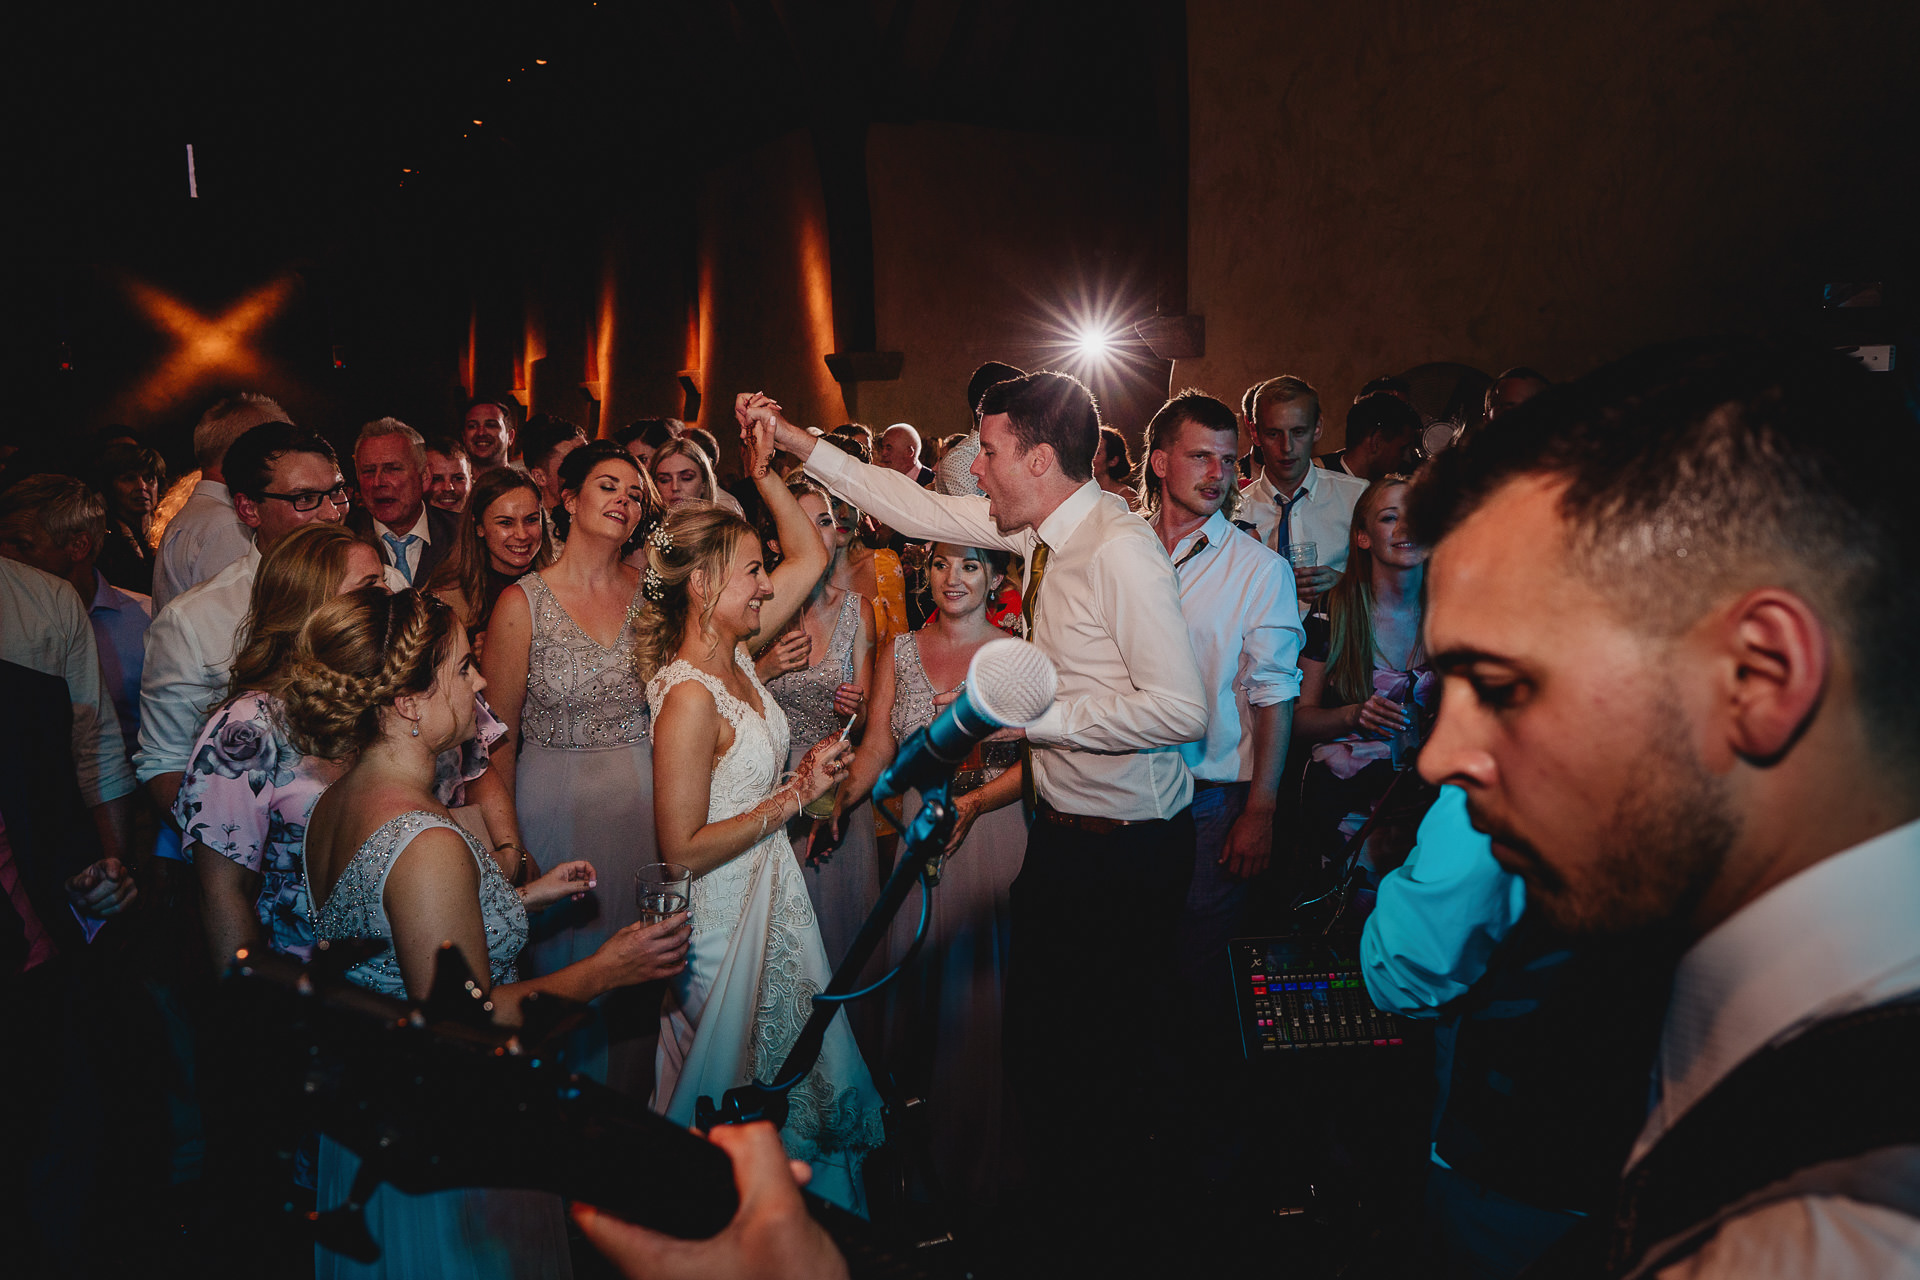 Wedding guests dancing to a band inside the barn